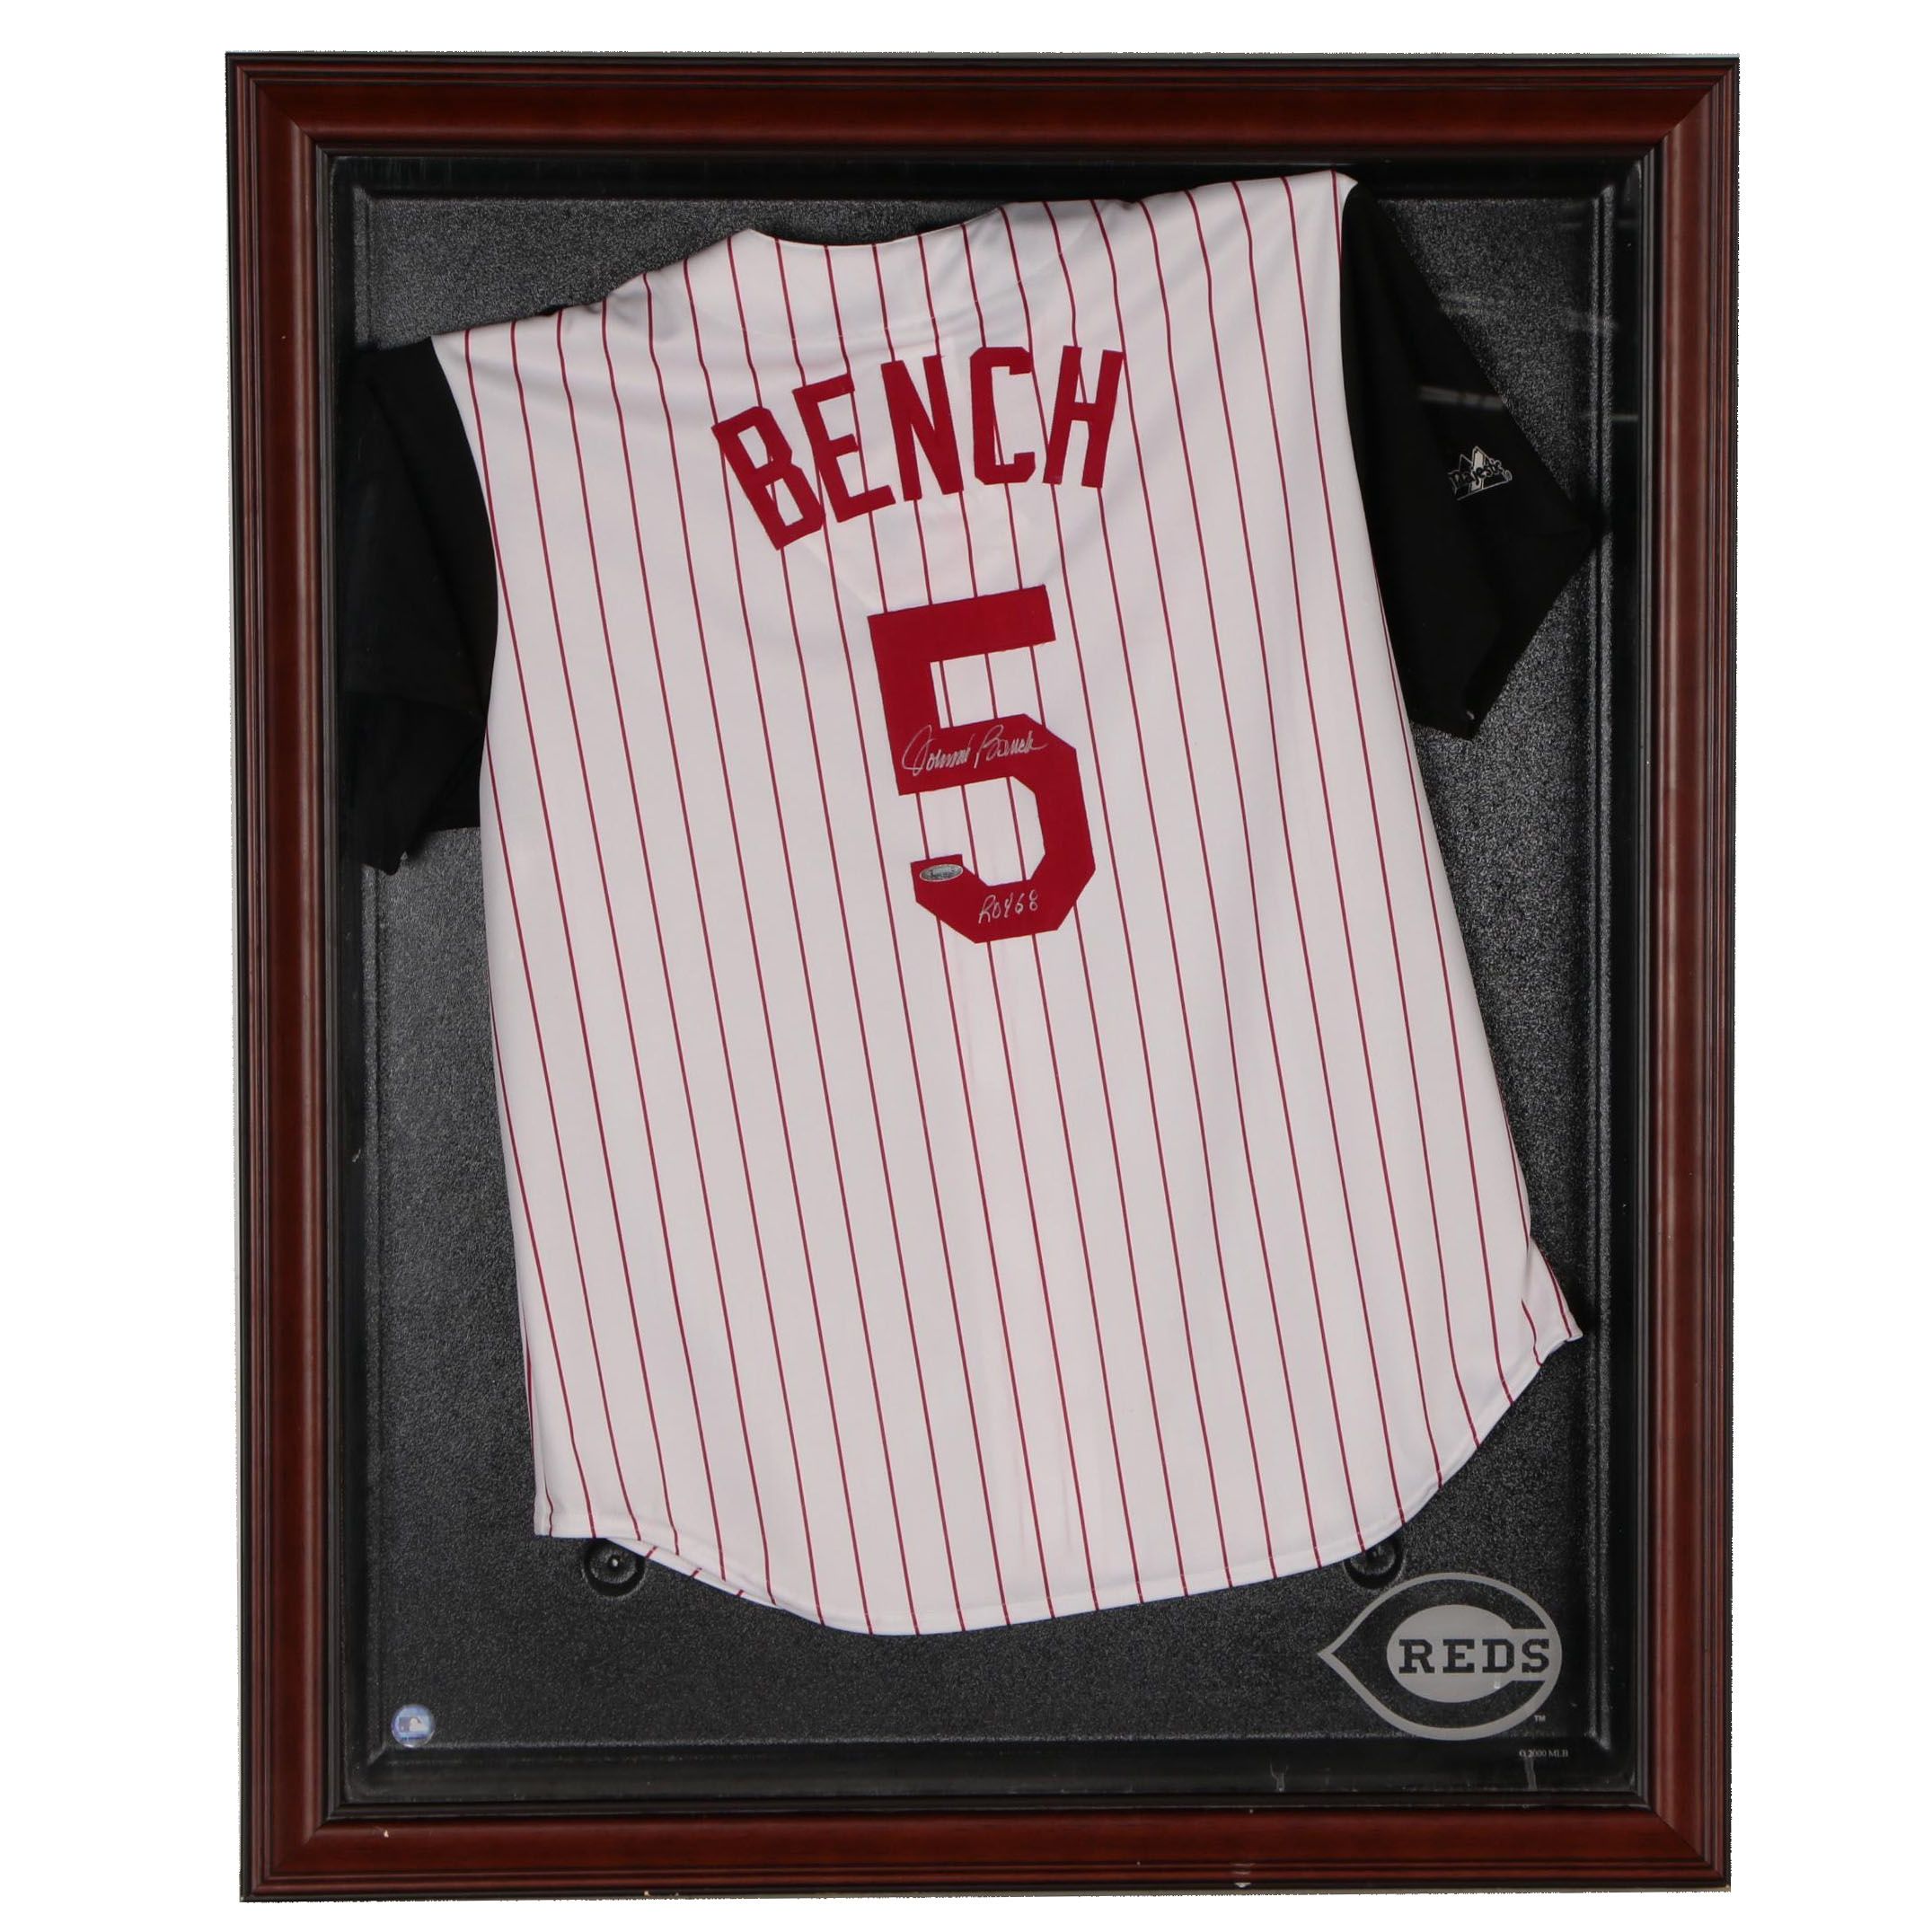 johnny bench jersey number